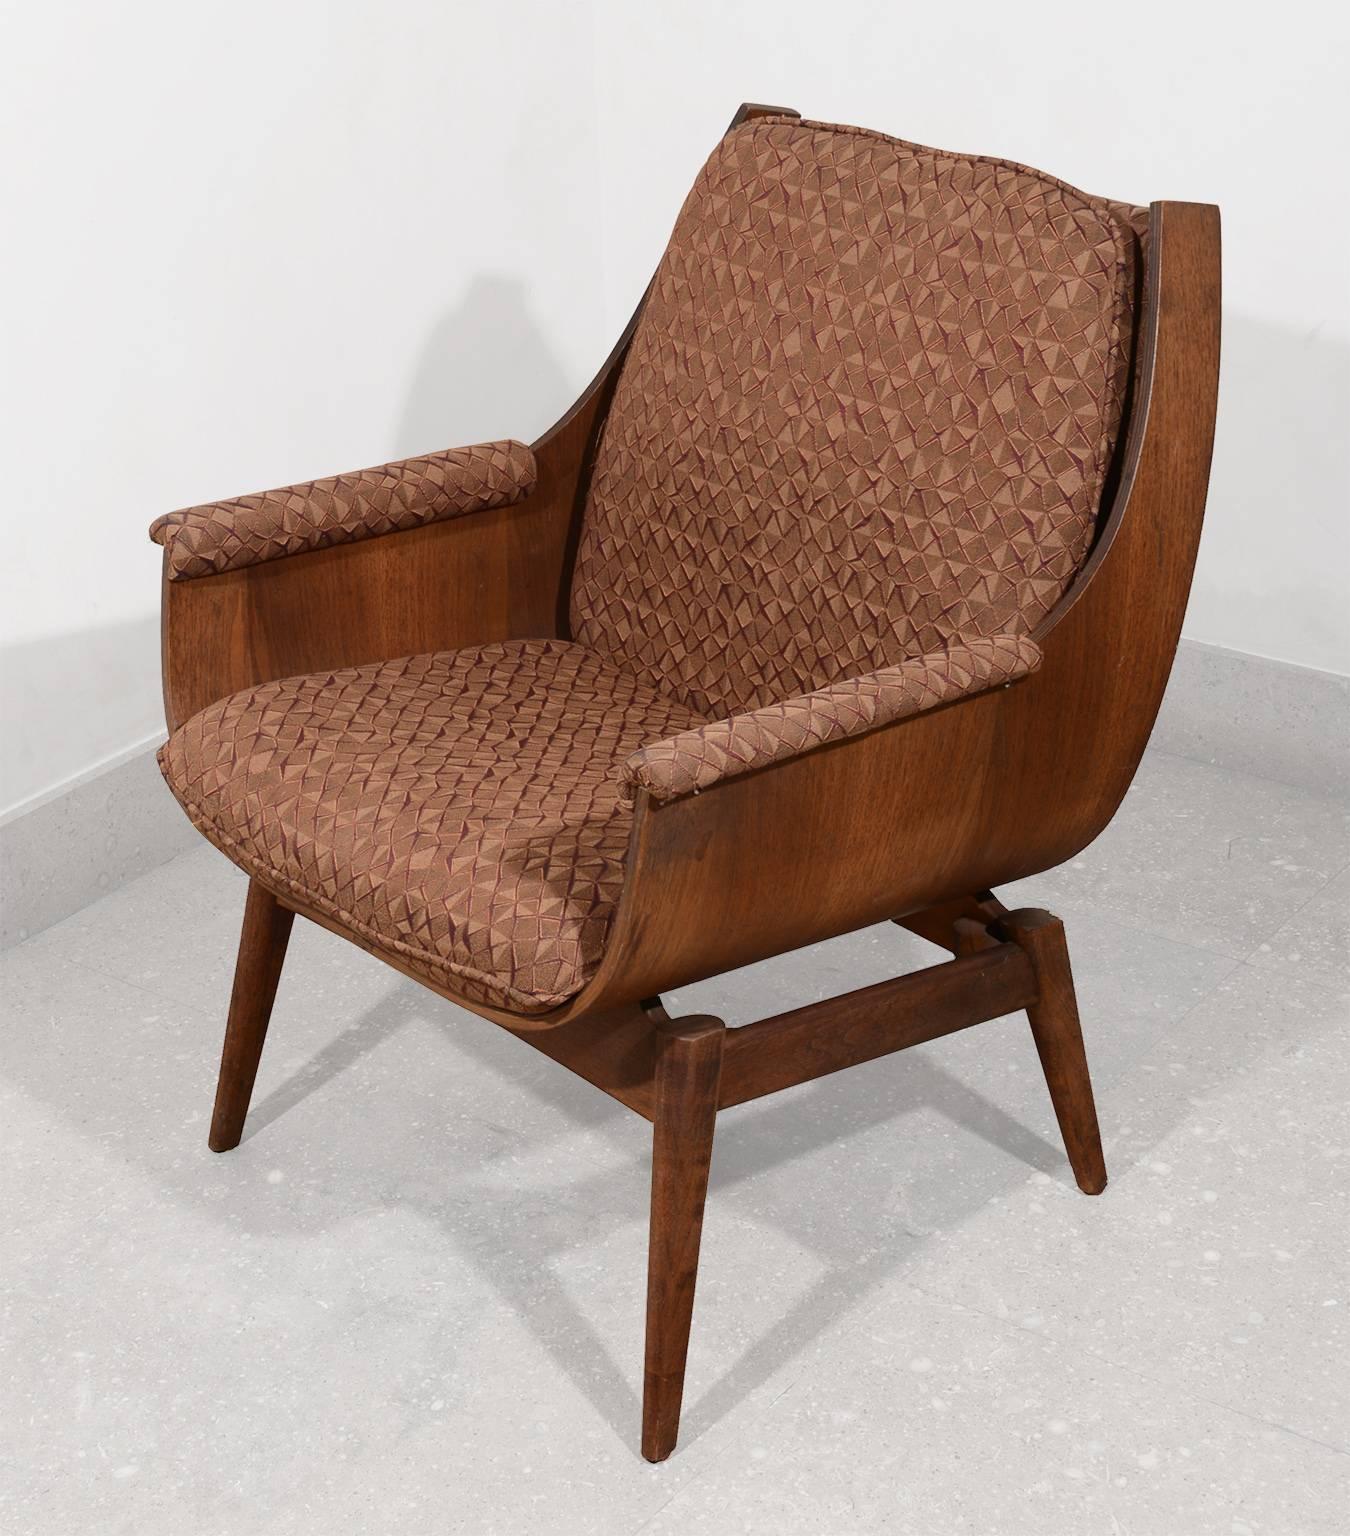 20th century formed wood armchair.